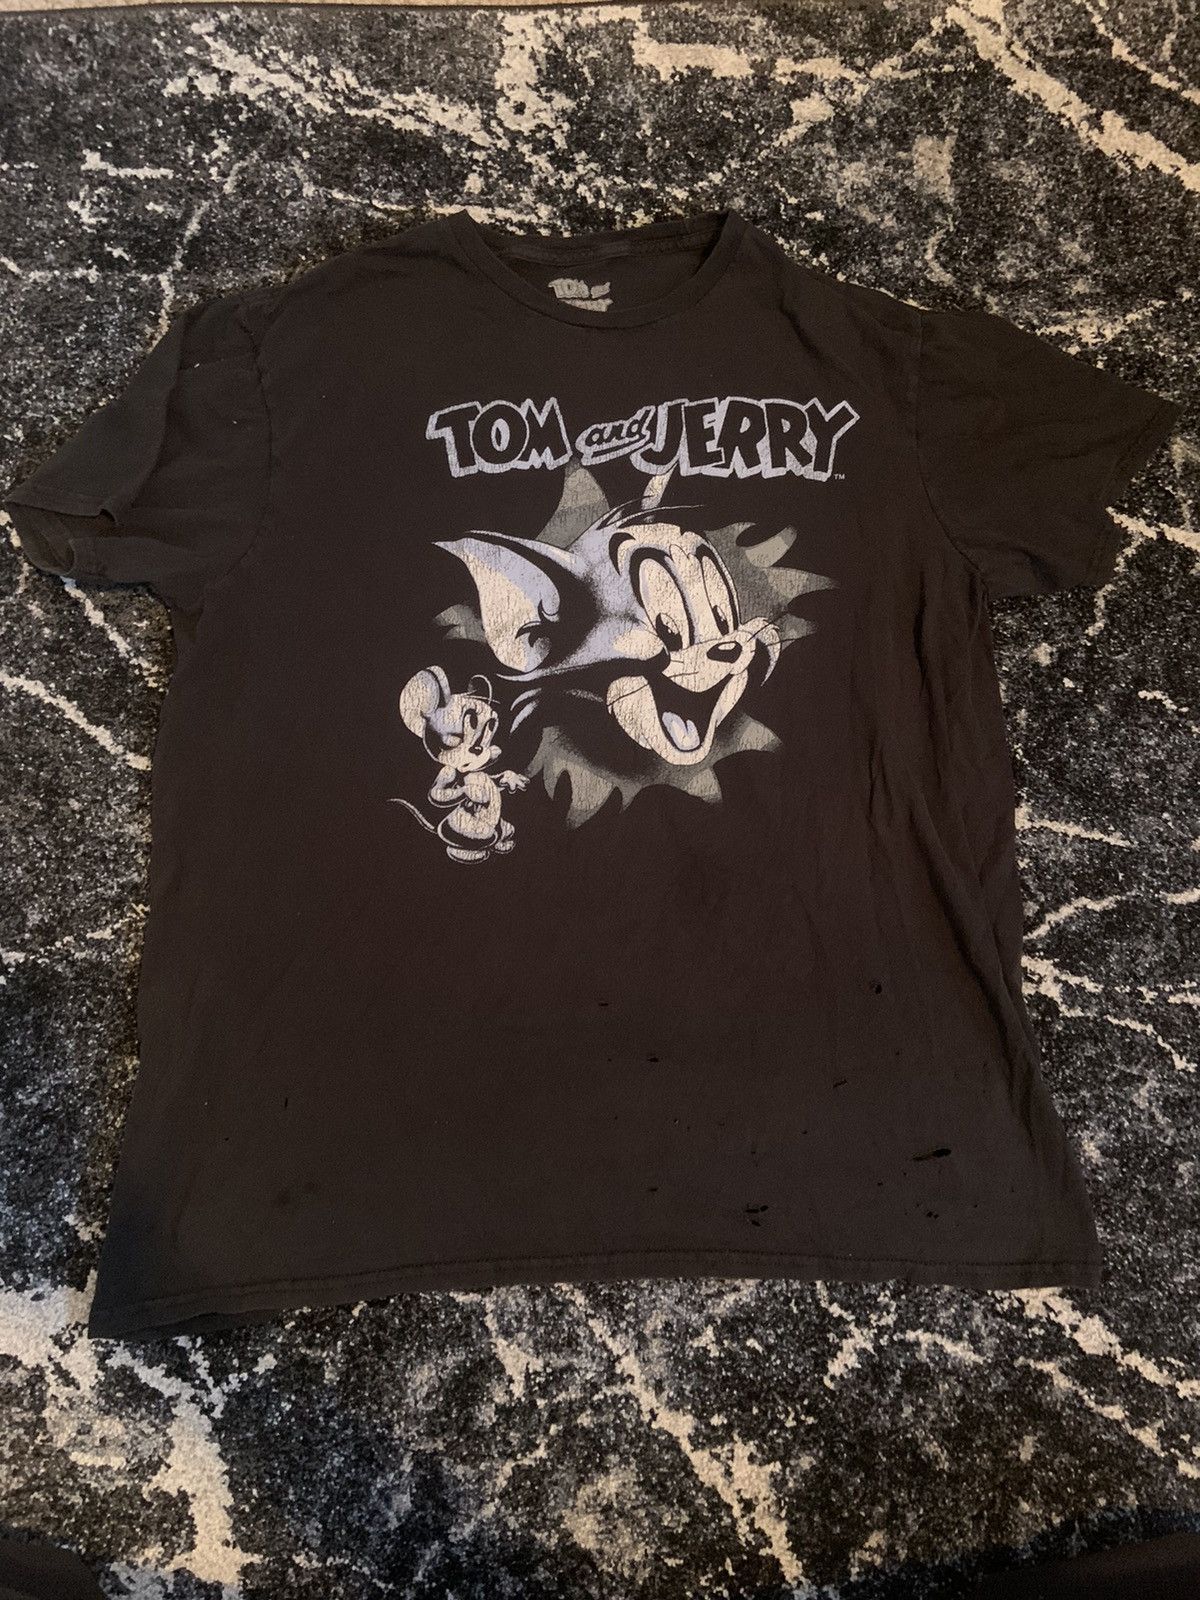 Vintage Distressed Vintage Tom and Jerry Shirt Size US M / EU 48-50 / 2 - 1 Preview